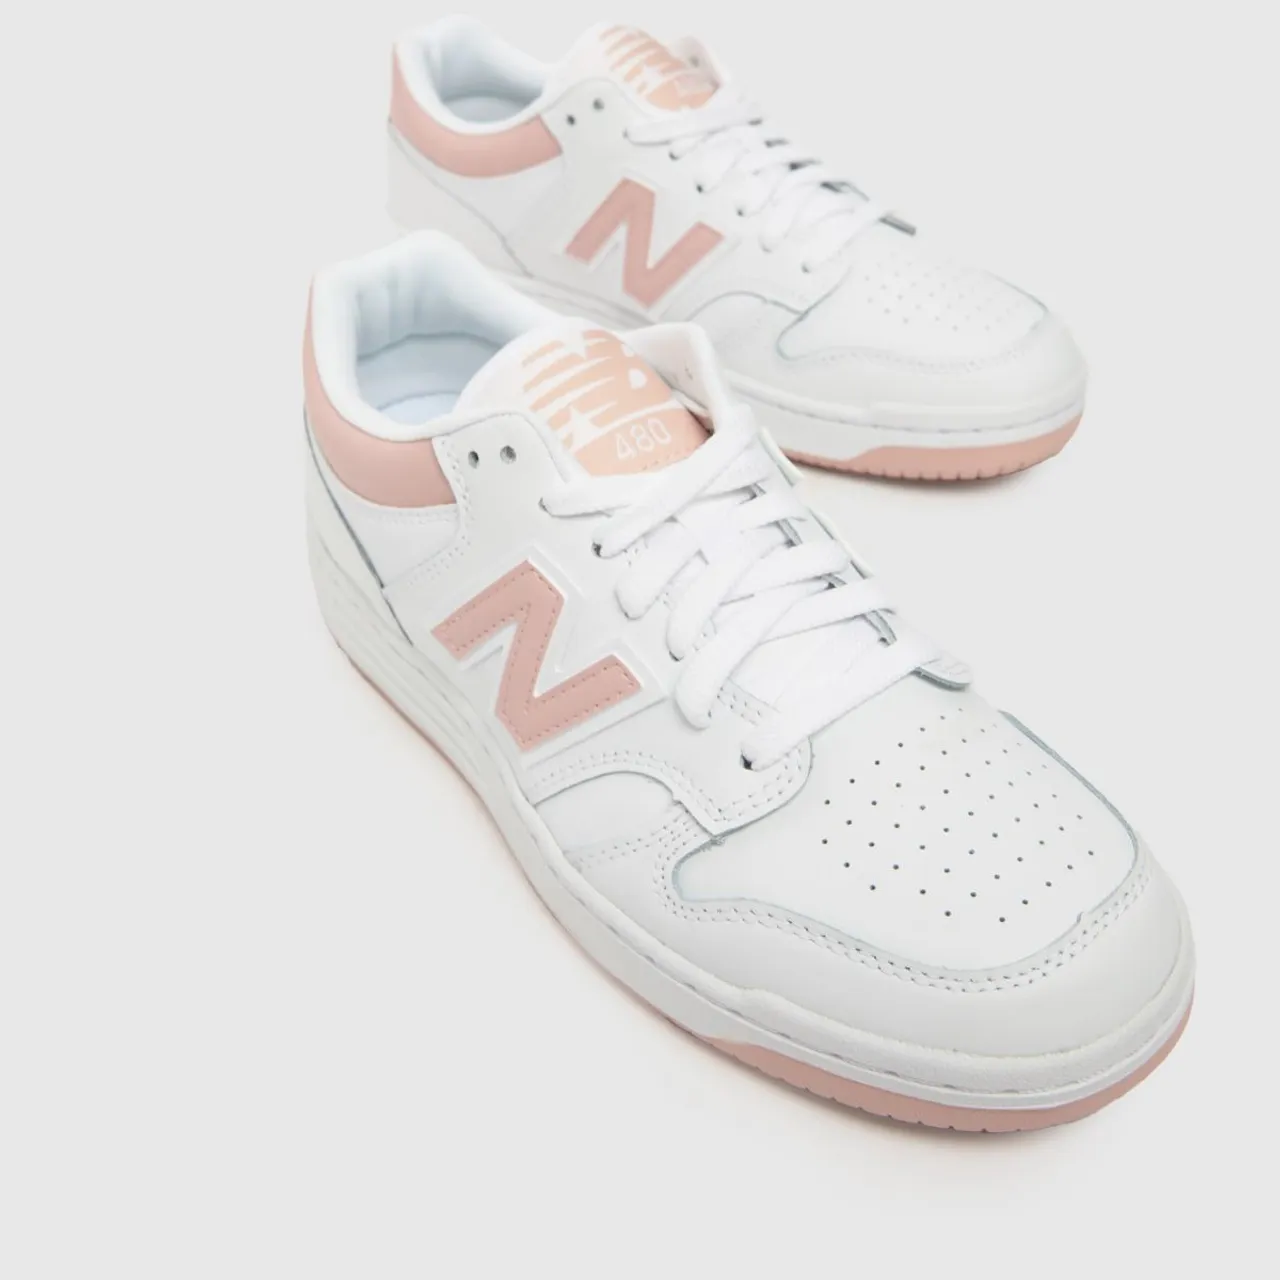 New Balance 480 Trainers In White & Pink